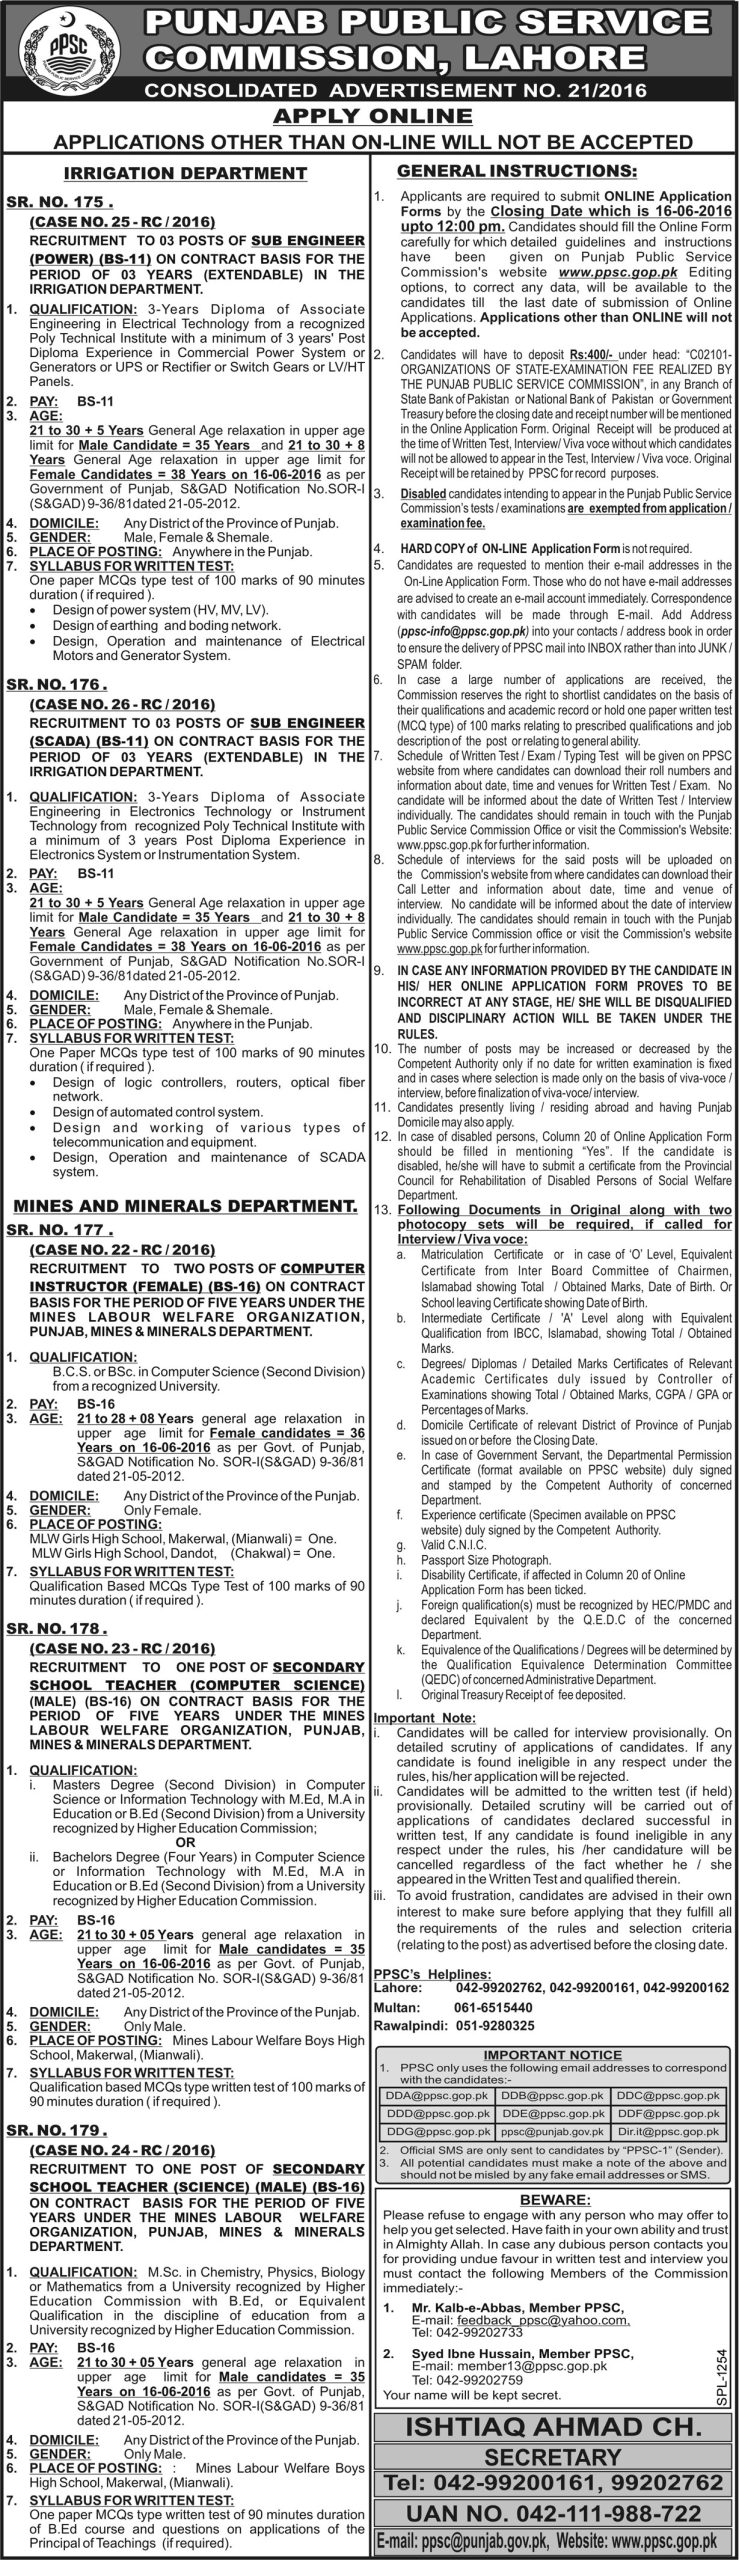 PPSC Computer Instructor Female Jobs May 2023 Mins and Minerals Department